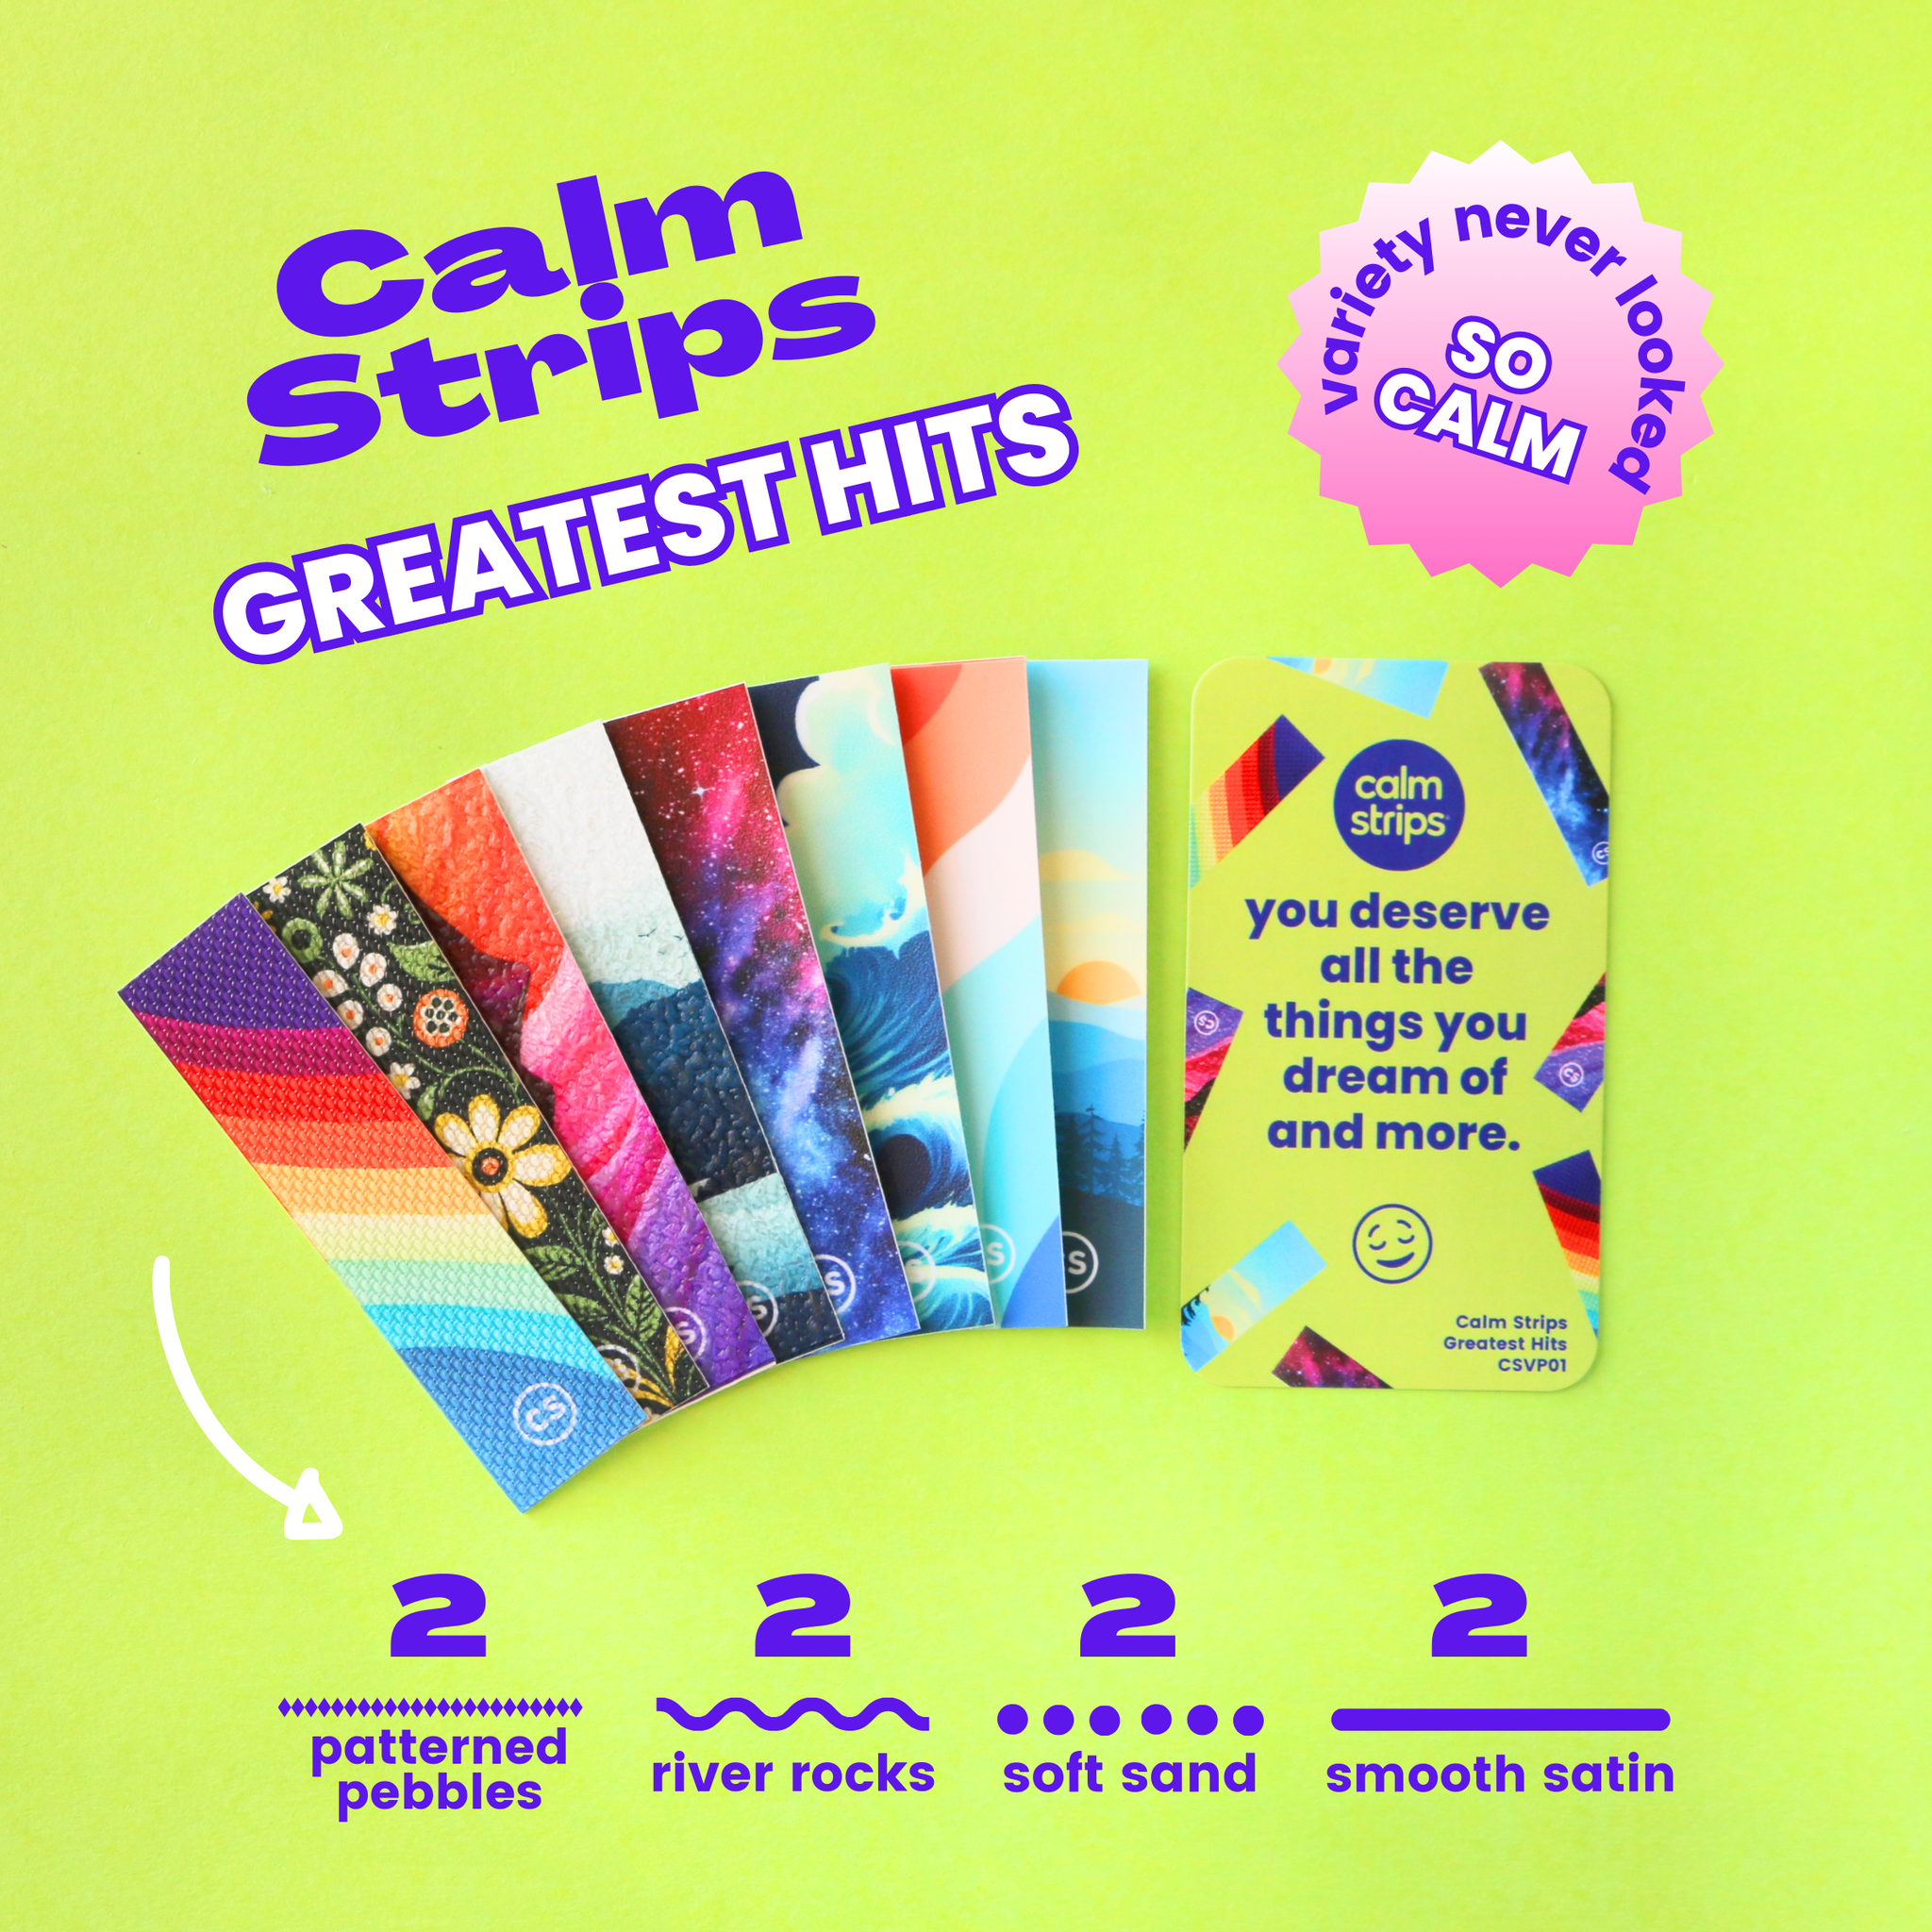 CARRY TAG (SILVER) – Calm Strips